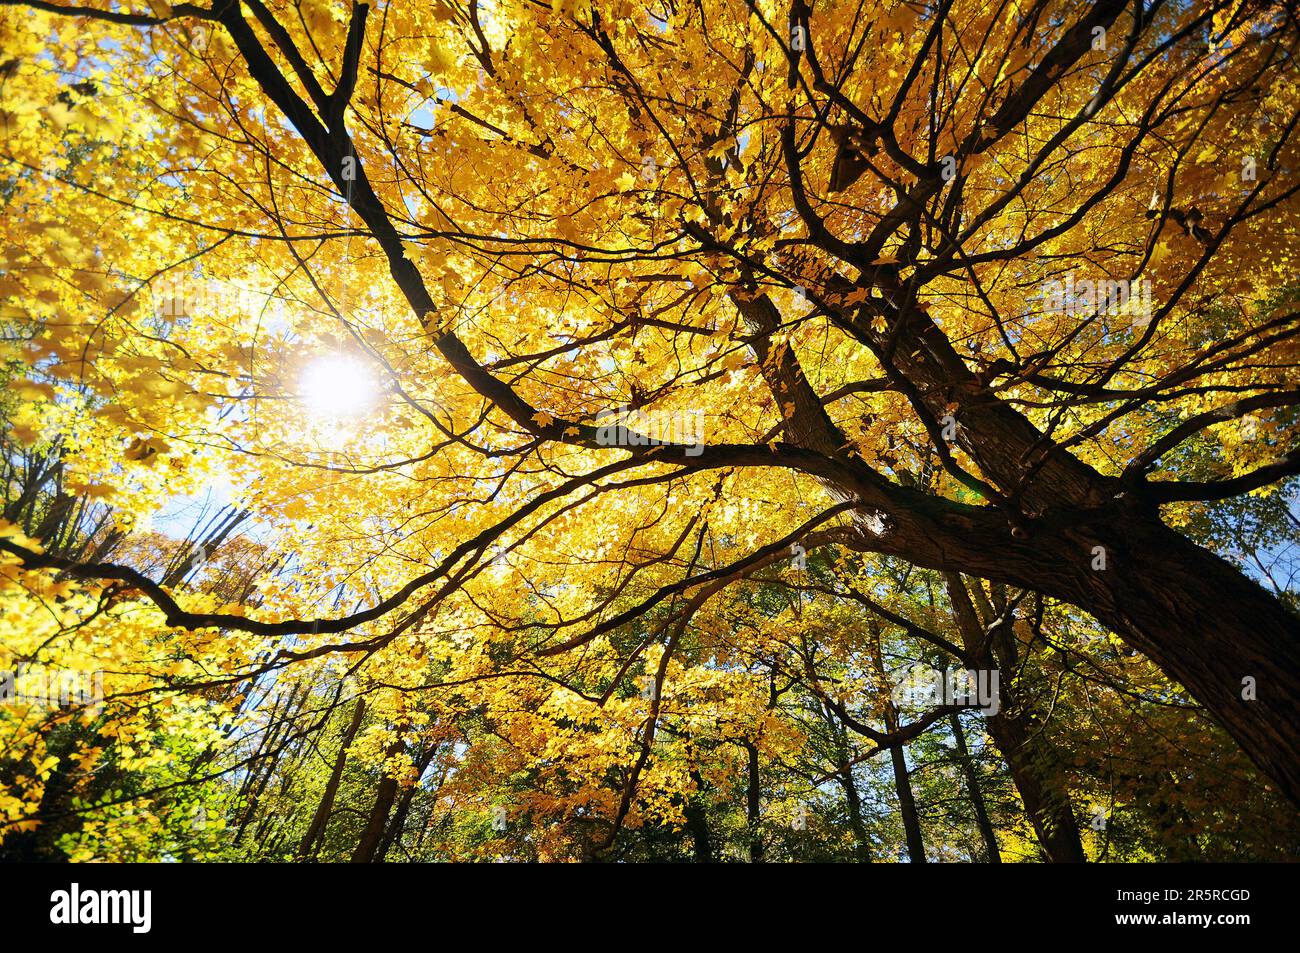 Acer maple tree with yellow leaves in autumn with evening sunshine peeking through the tree canopy Stock Photo